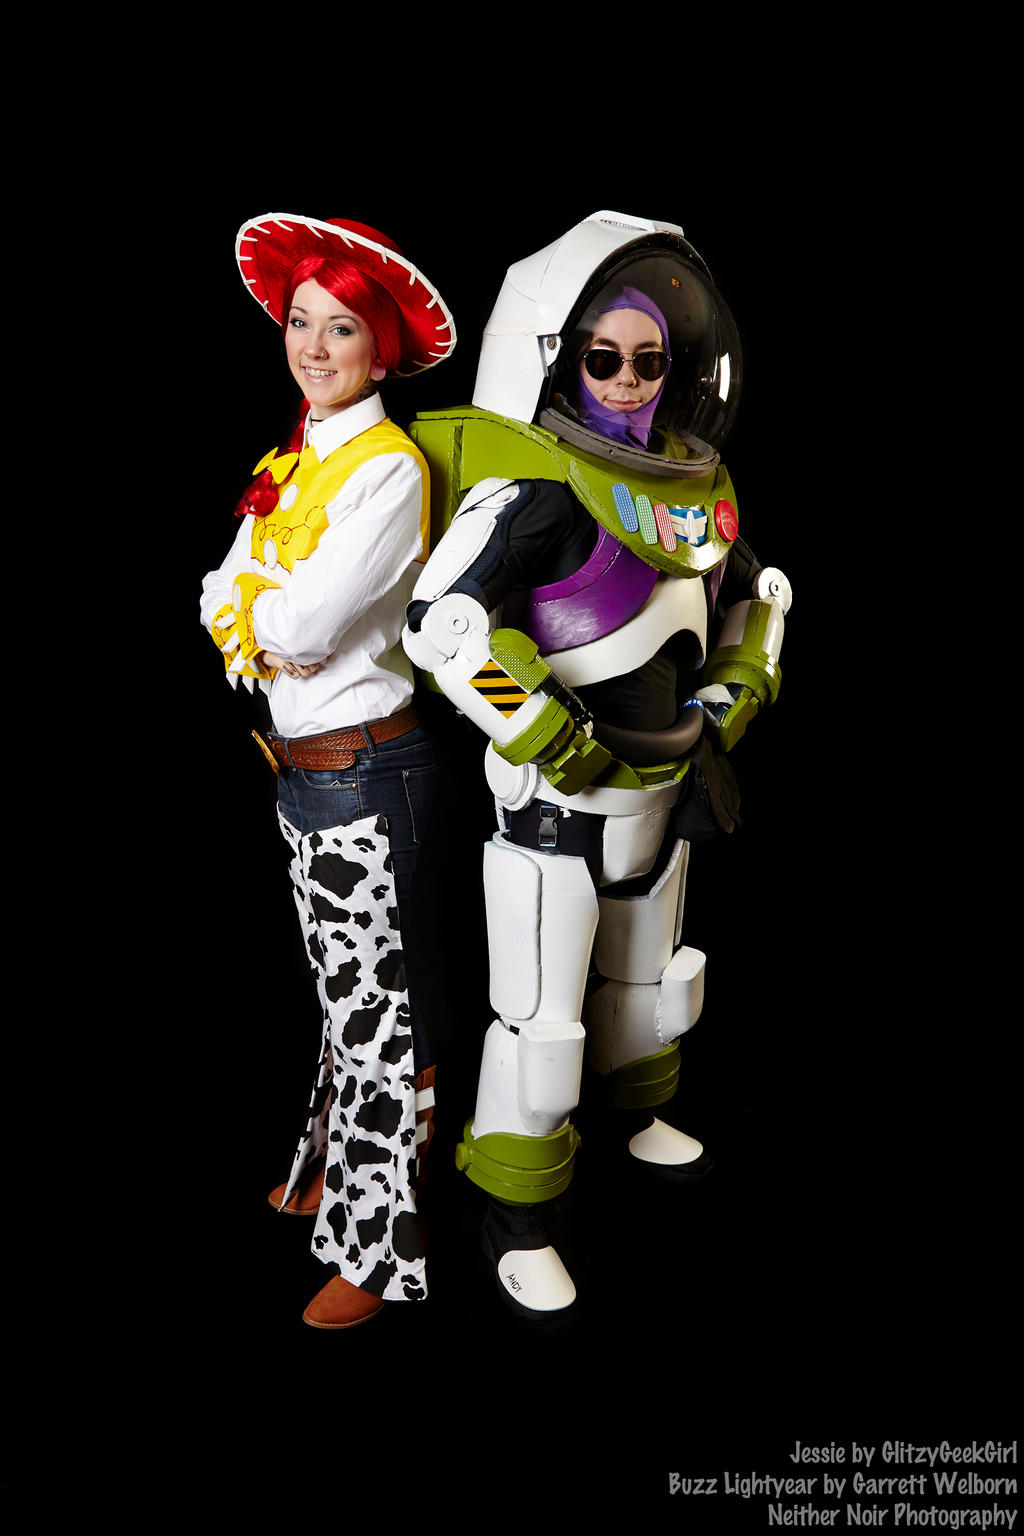 Jessie and Buzz Lightyear Cosplay from Toy Story by glitzygeekgirl on DeviantArt